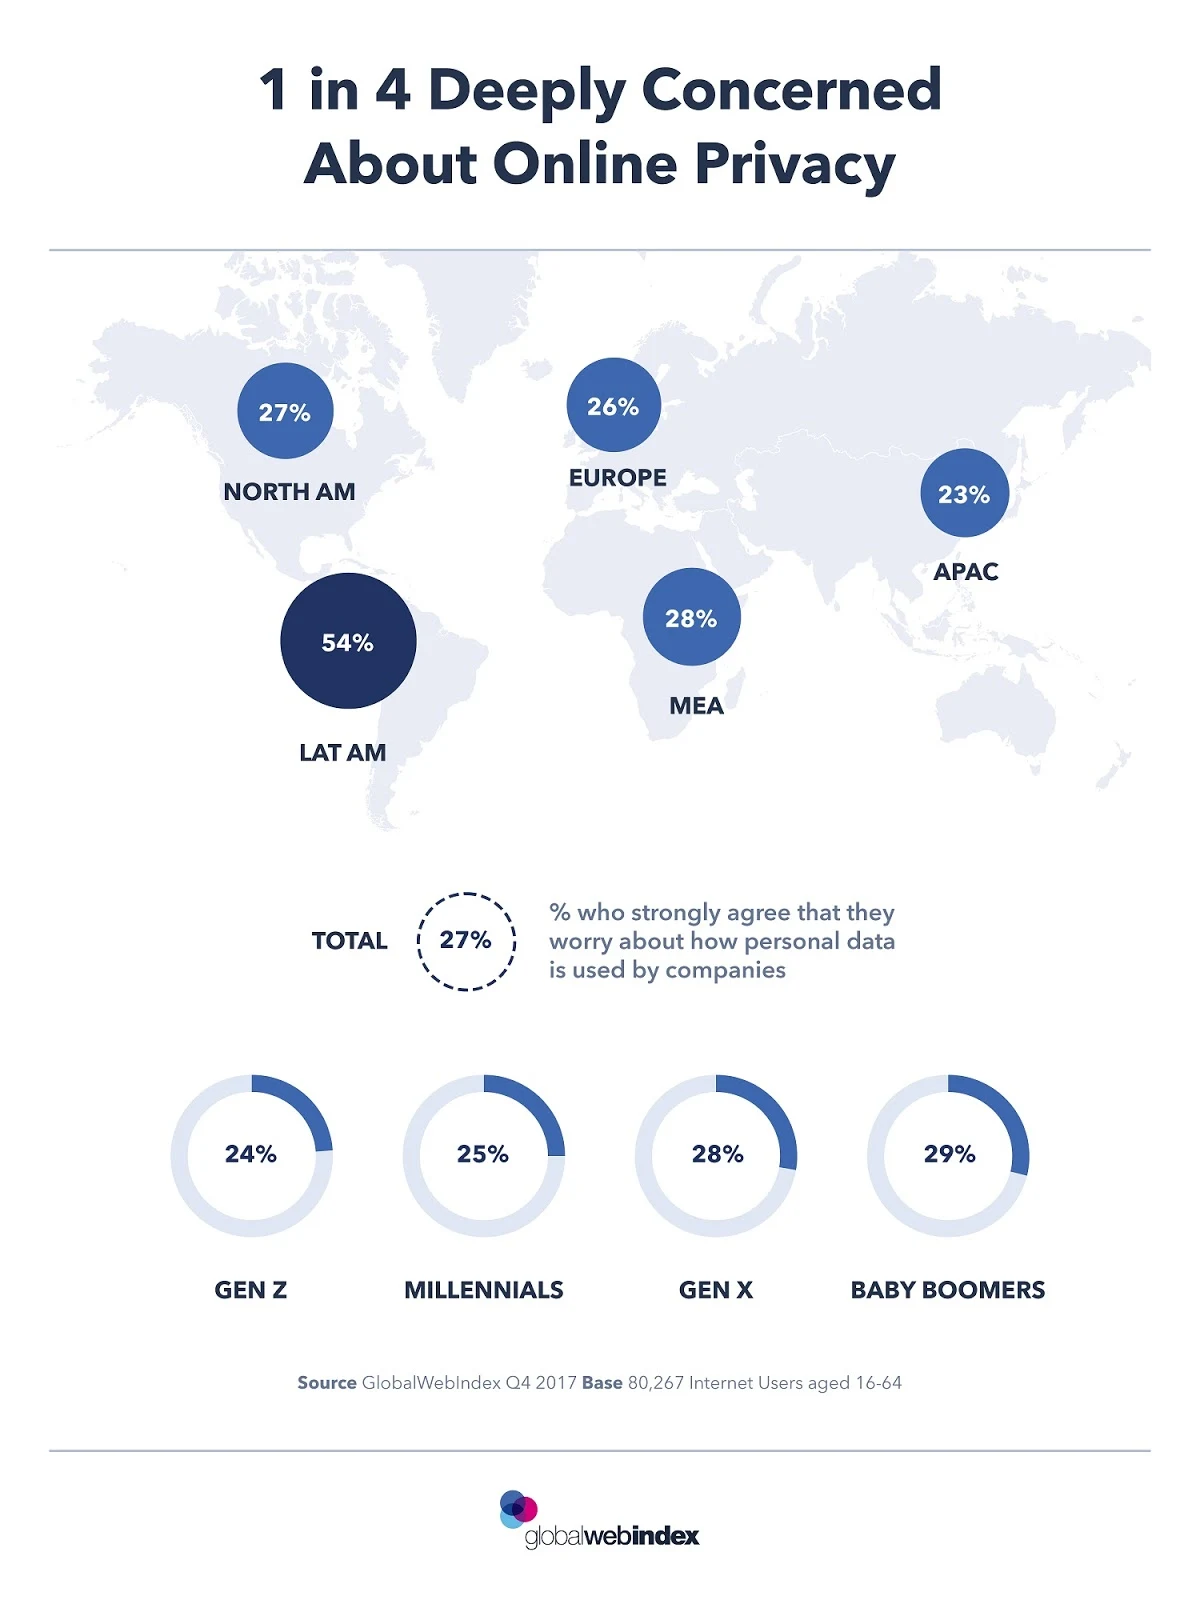 CHART OF THE DAY: 1 in 4 Deeply Concerned About Online Privacy